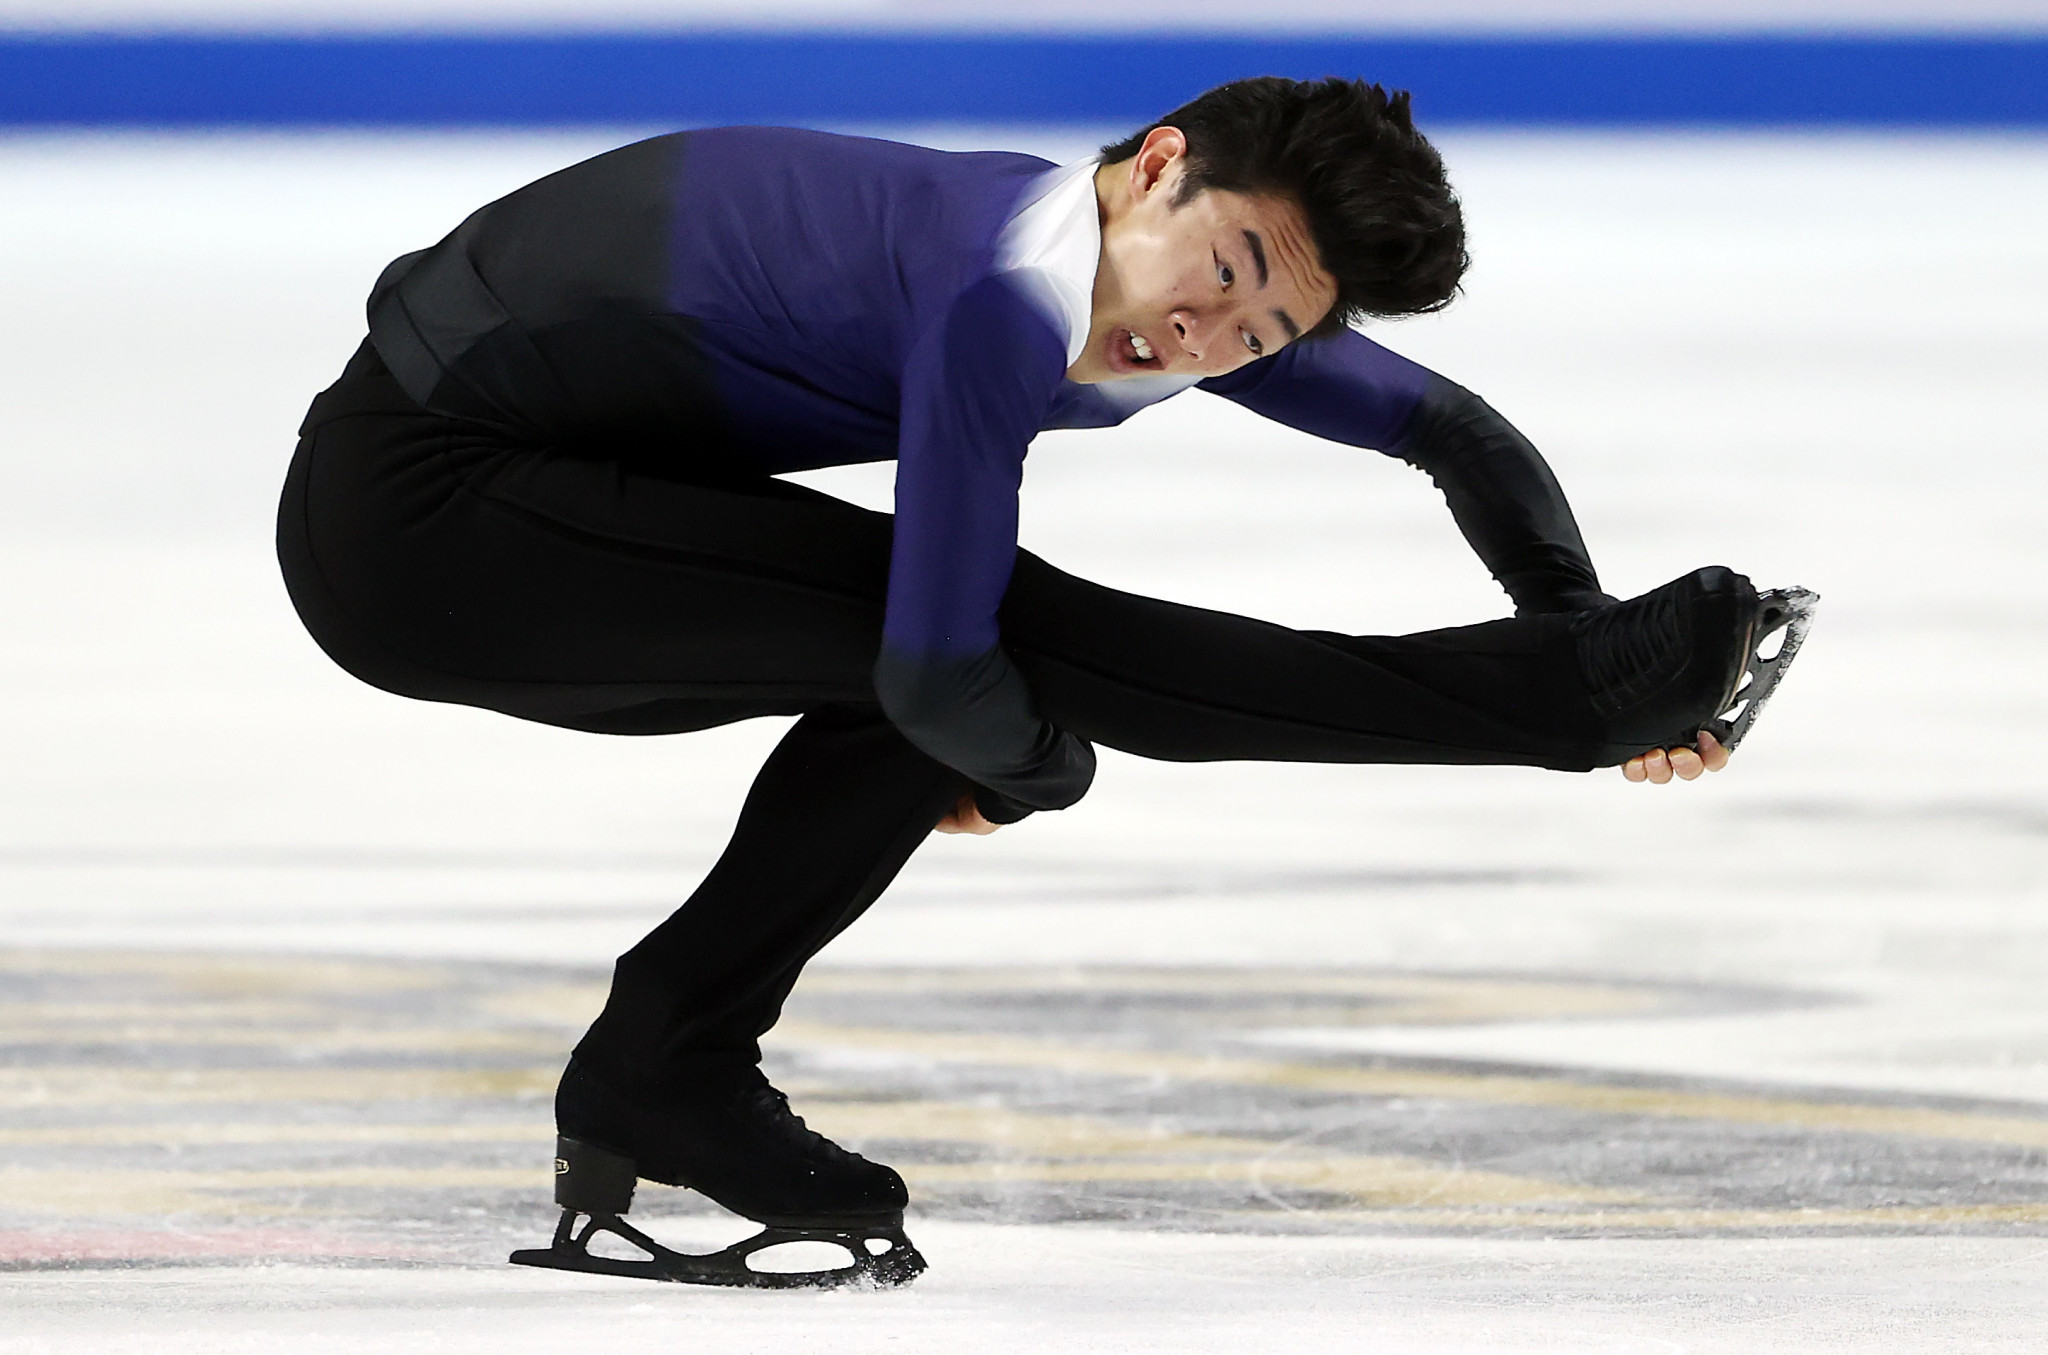 Nathan Chen's unbeaten streak which had lasted more than three seasons came to an end in Las Vegas ©Getty Images